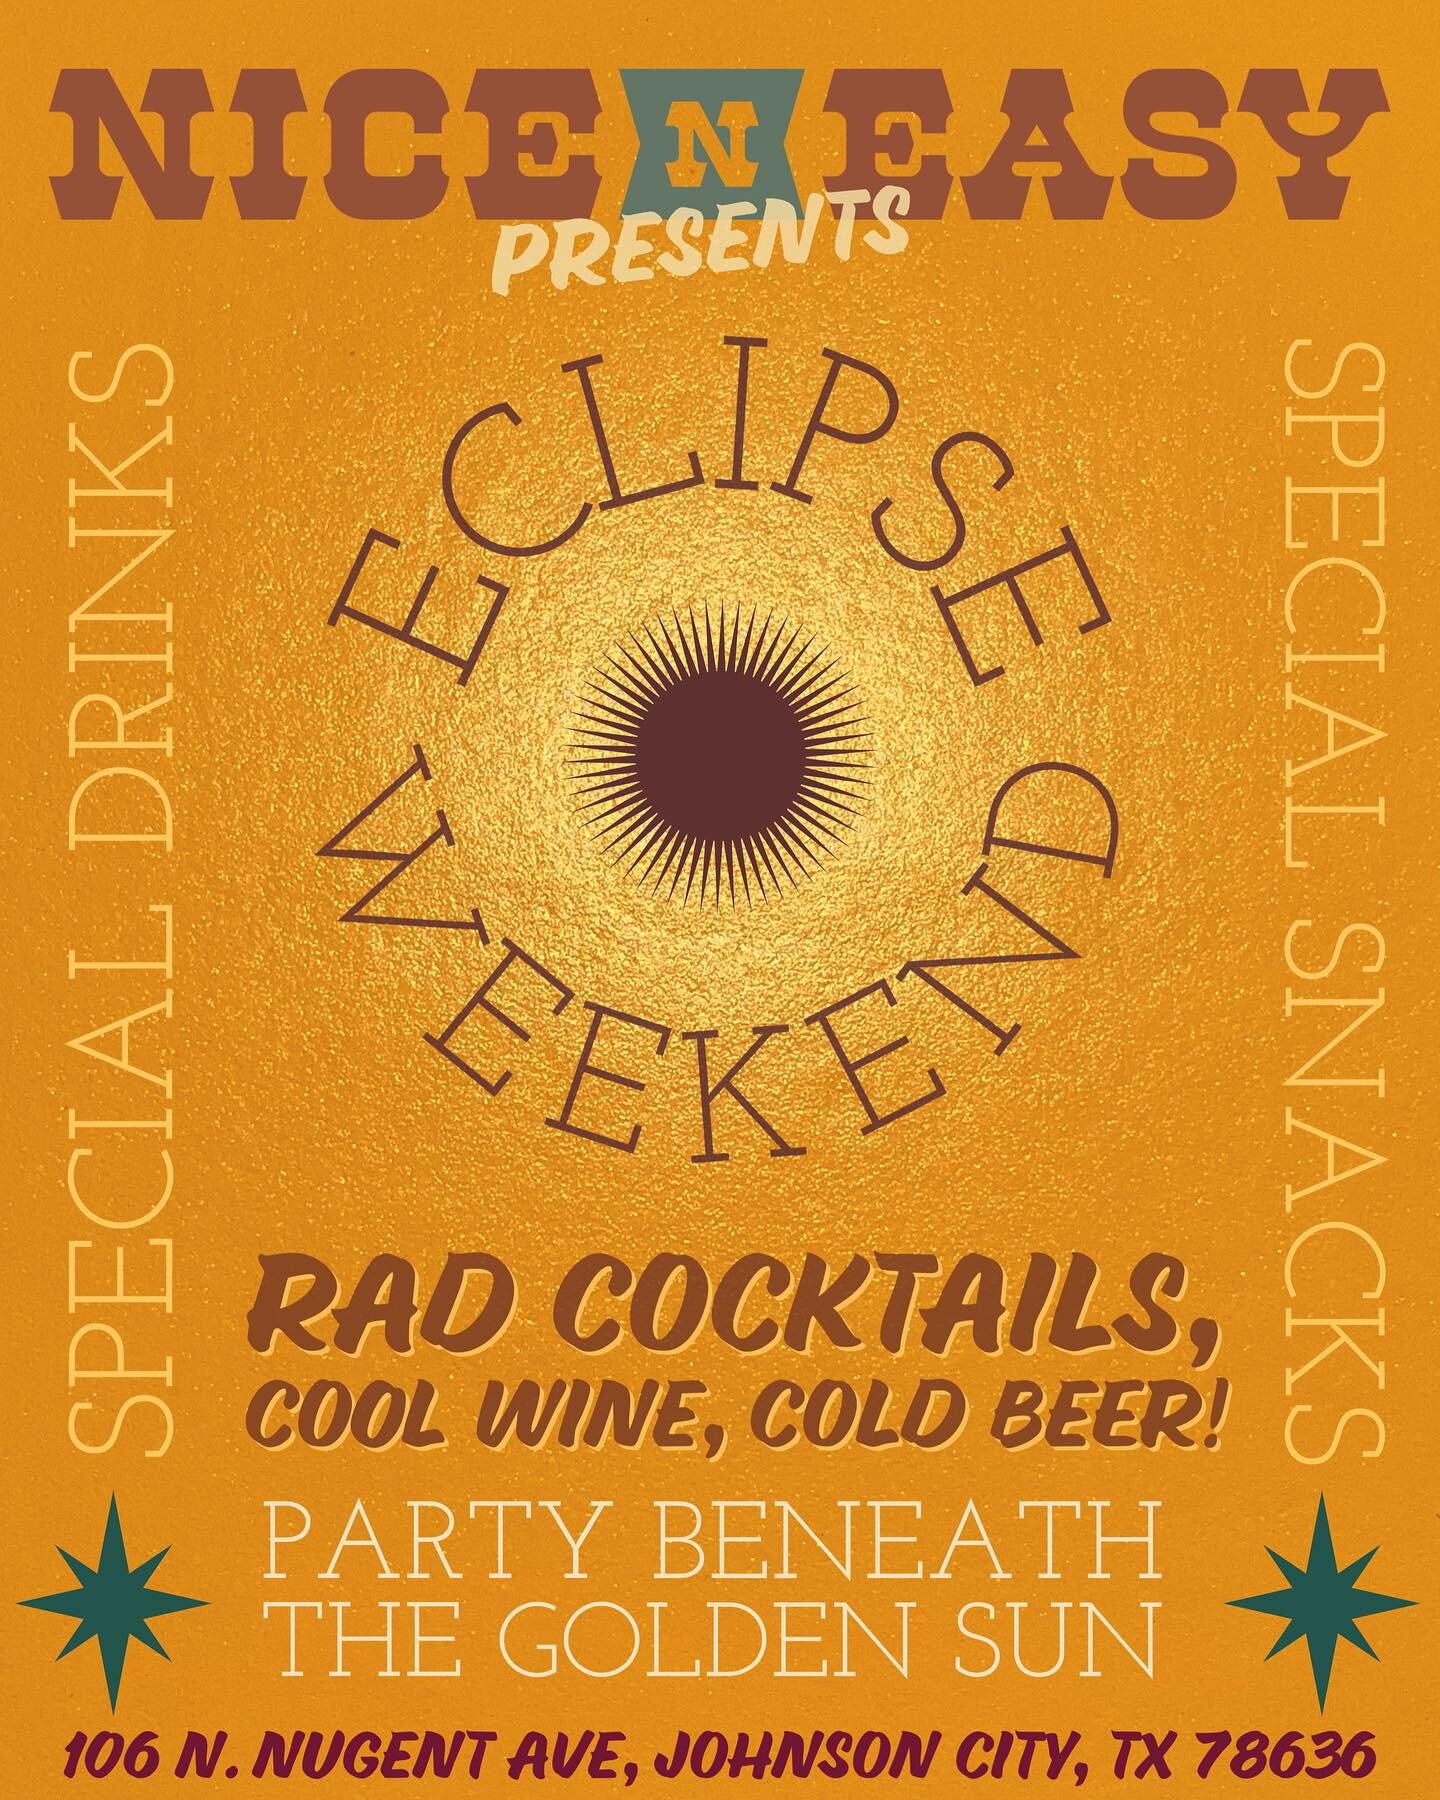 ECLIPSE WEEKEND &lsquo;24! Good pals of the EARTH, we are extending hours, bringing in a super special food guest - @wienersystem - and bulking up on cocktail fodder to ready ourselves (and you) for a most monumental celestial event. We are smack dab